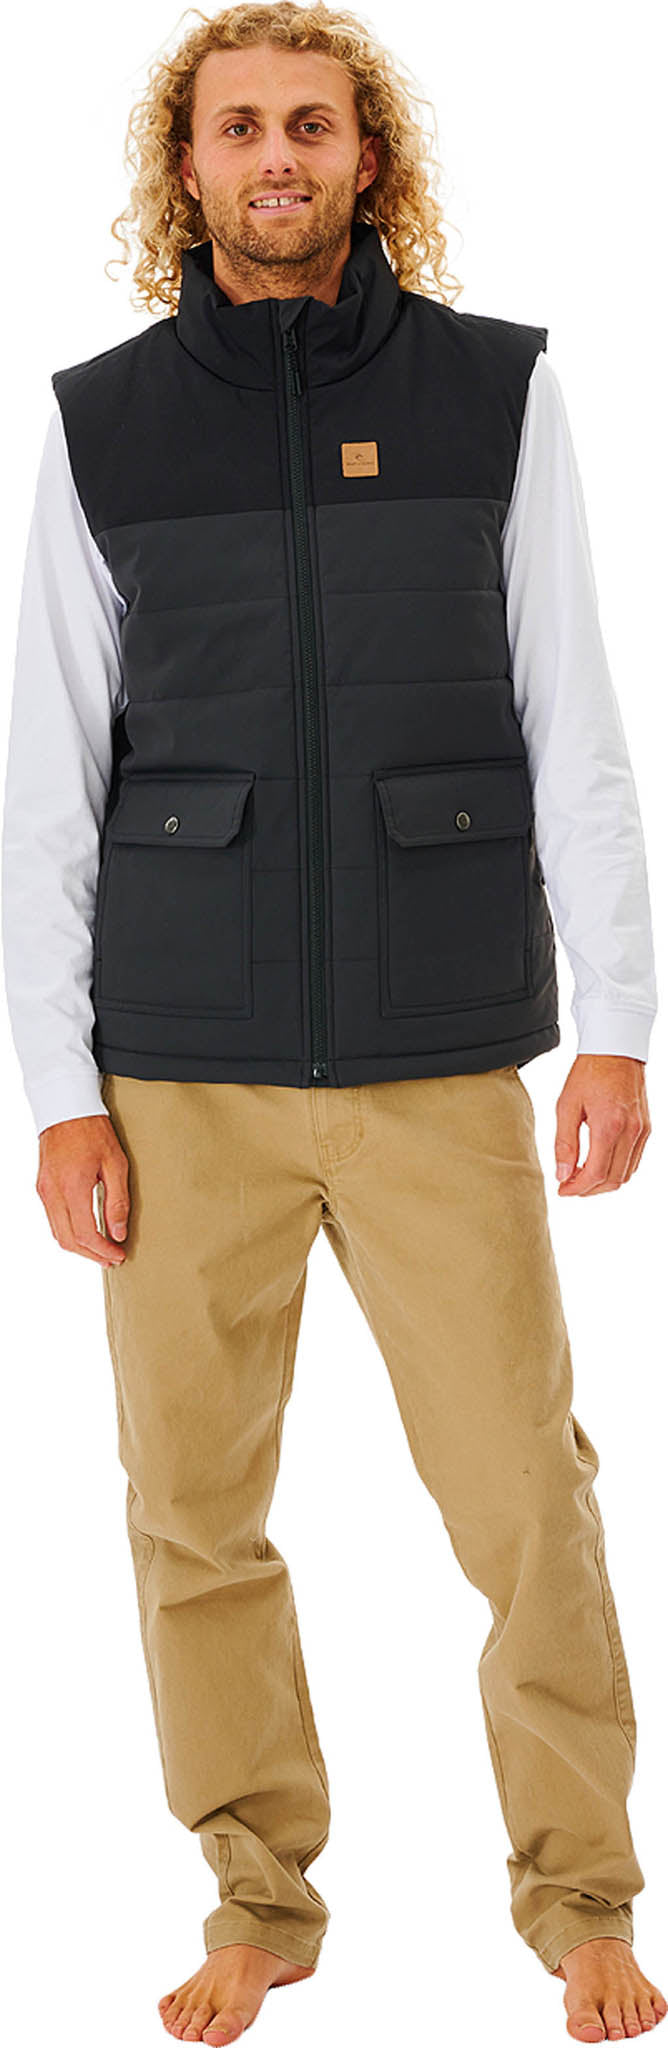 gilet rip curl homme